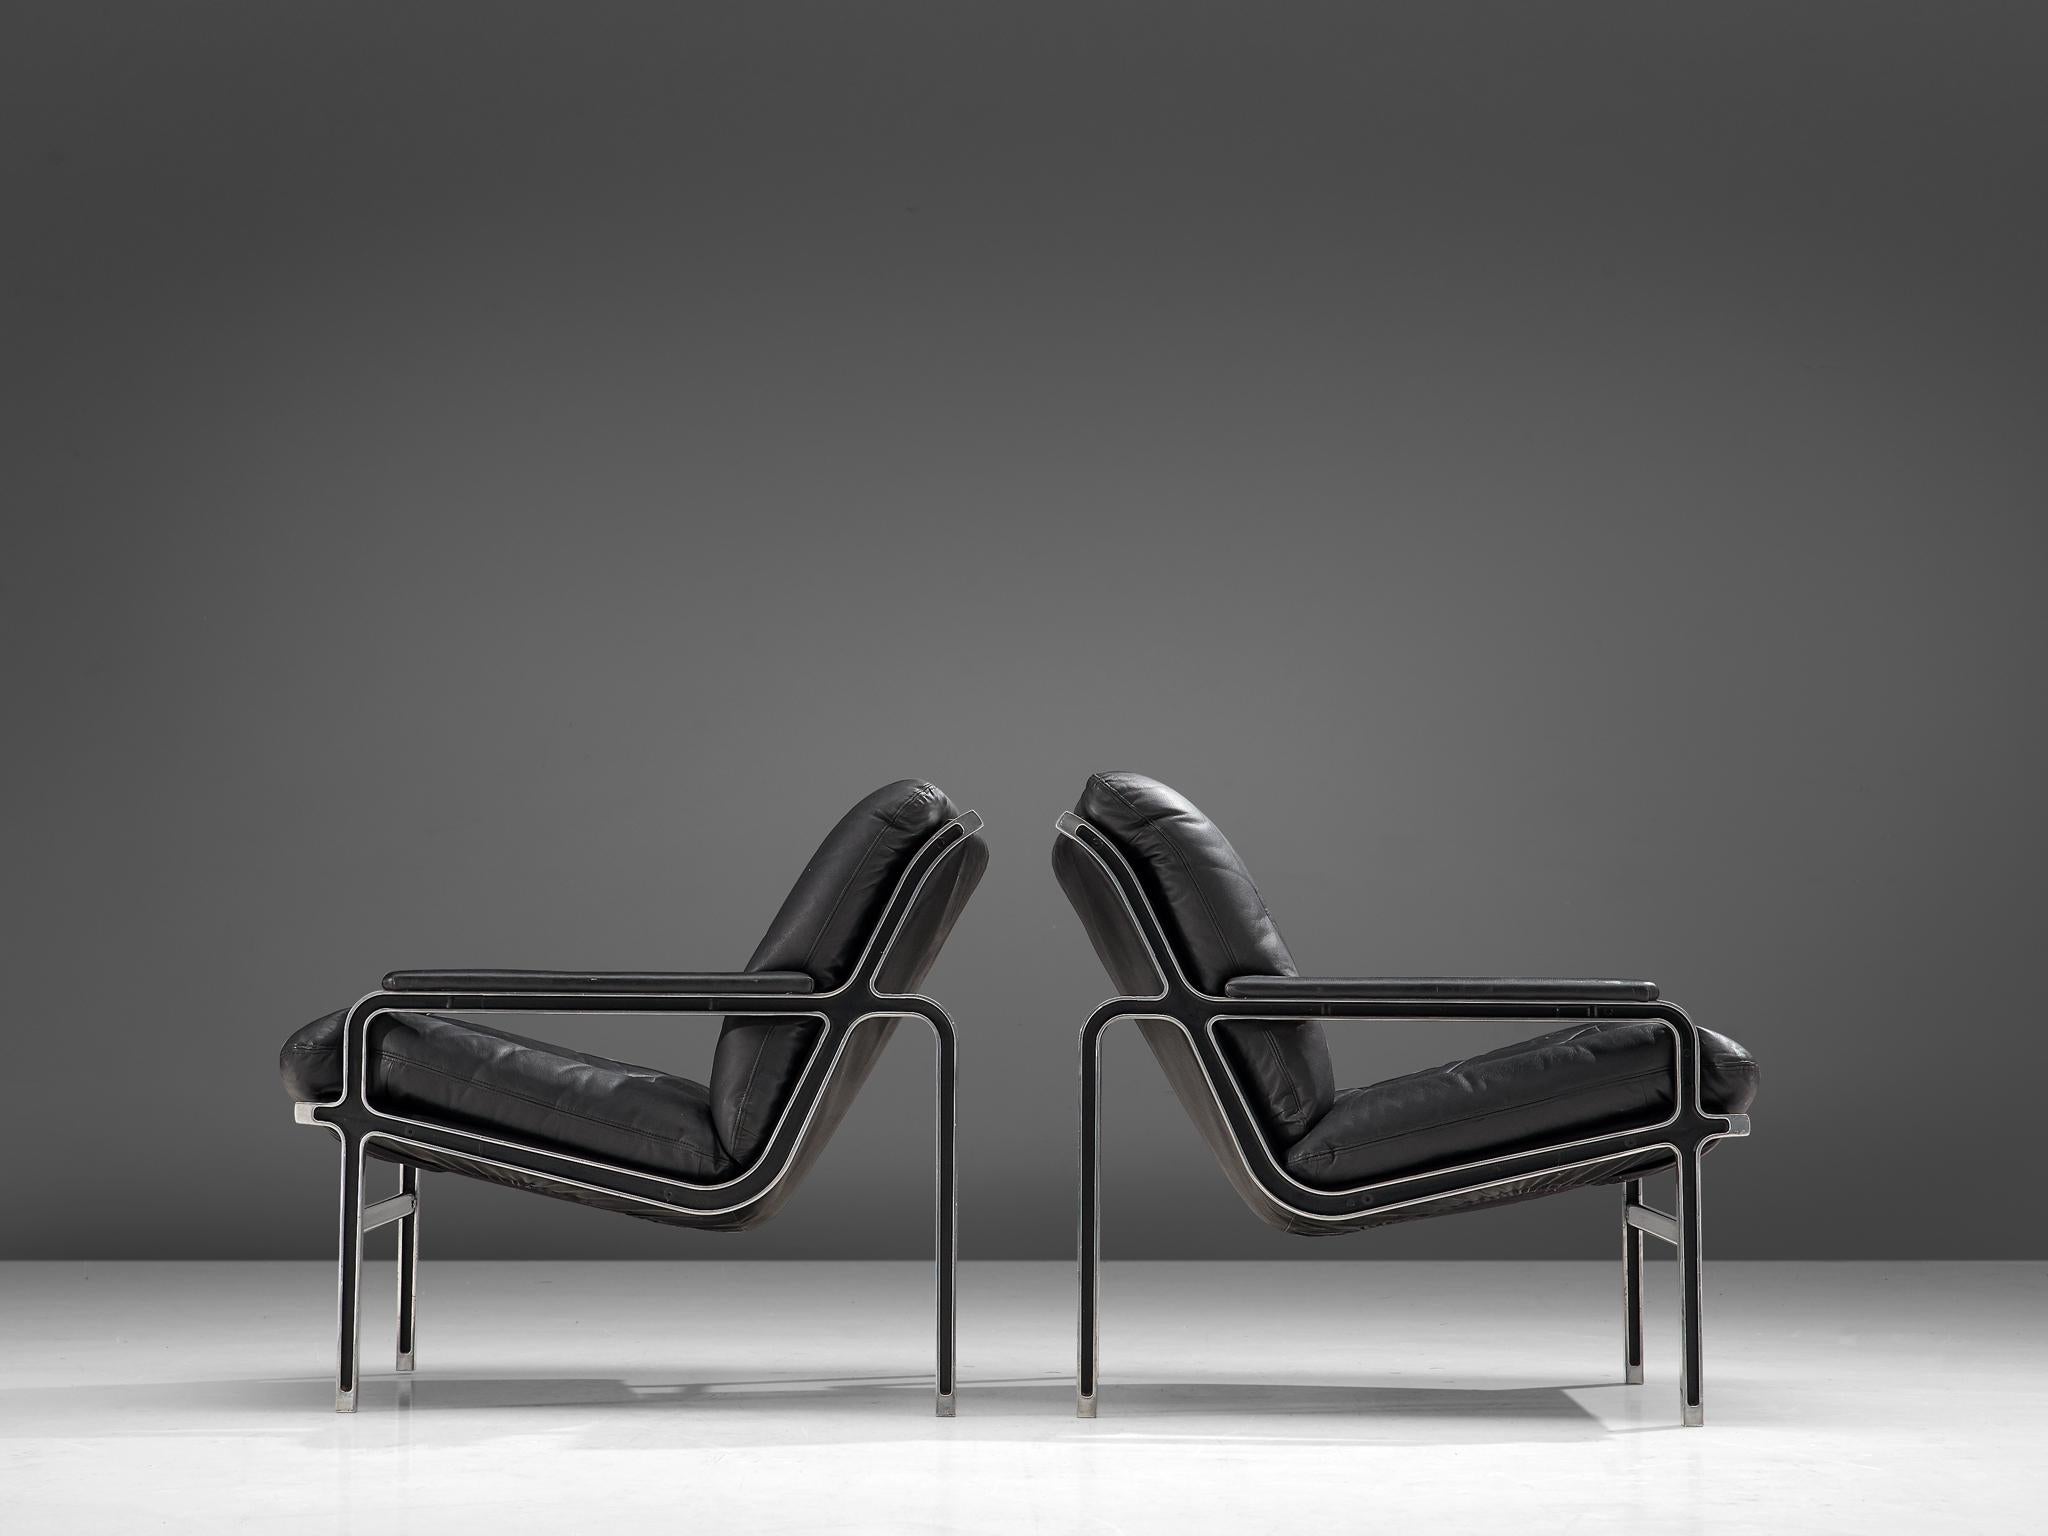 Andre Vandenbeuck for Strassle, pair of easy chairs, metal and leather, Switzerland, 1960s.

These well designed easy chairs are produced by Strassle in the 1960s. Functional and light thanks to the combination of strong, lasting materials; an